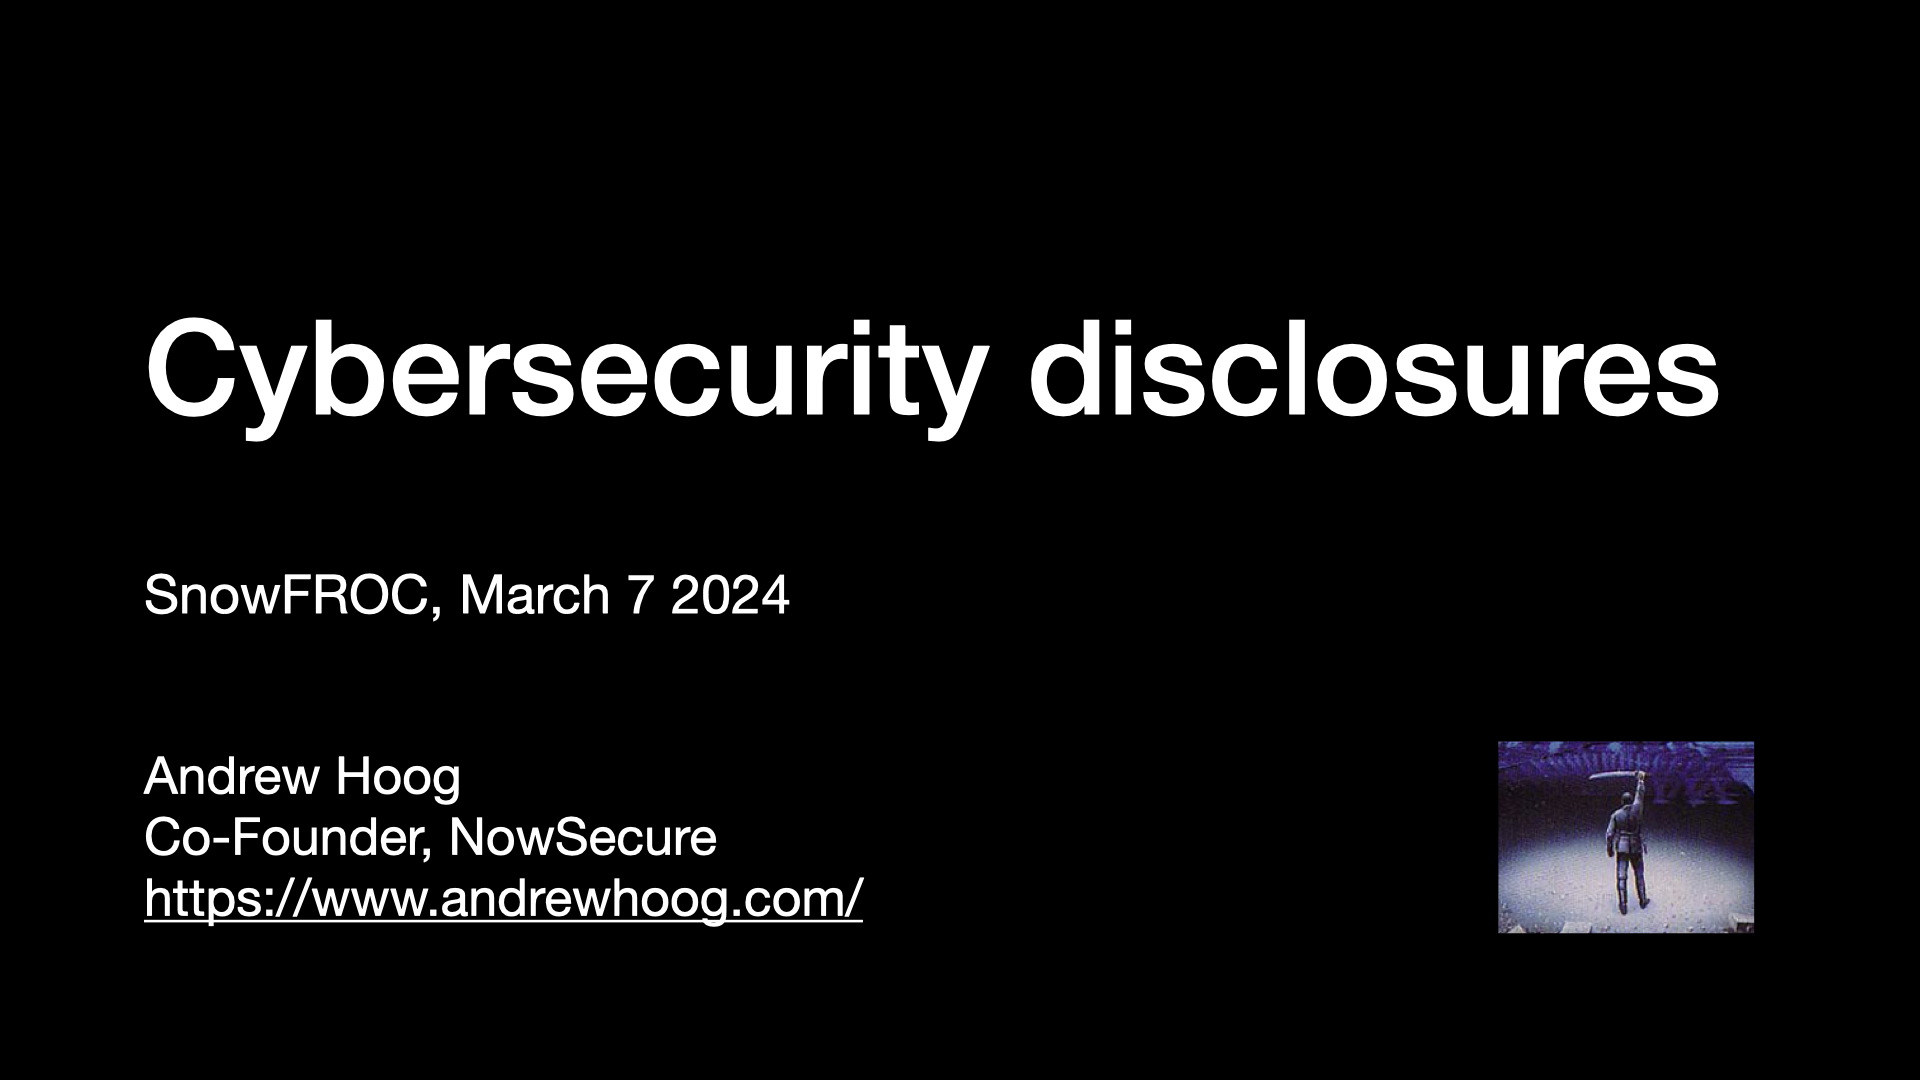 Cybersecurity disclosures SnowFROC, March 7 2024  Andrew Hoog Co-Founder, NowSecure https://www.andrewhoog.com/ 